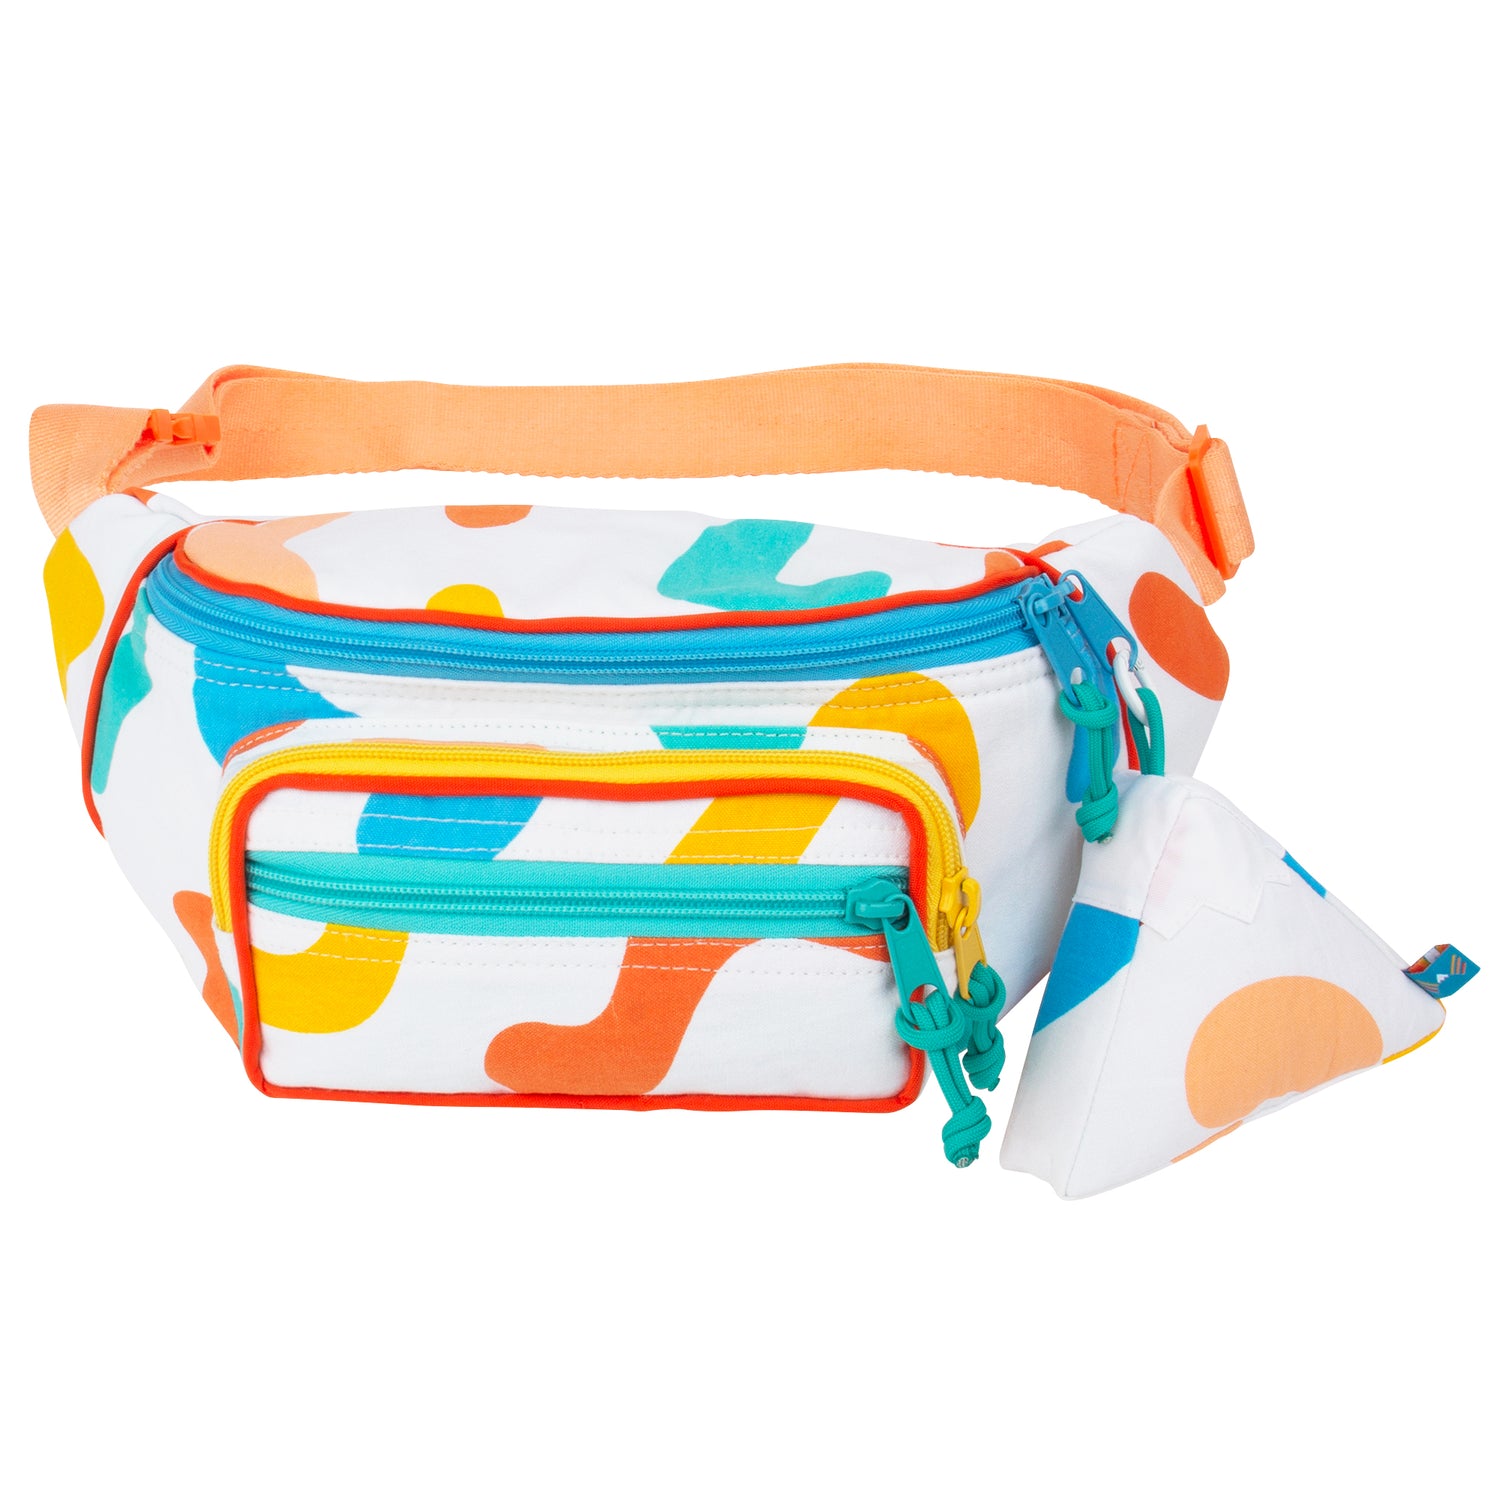 Large fanny pack sling in mostly white with colorful designs with a mountain design keychain